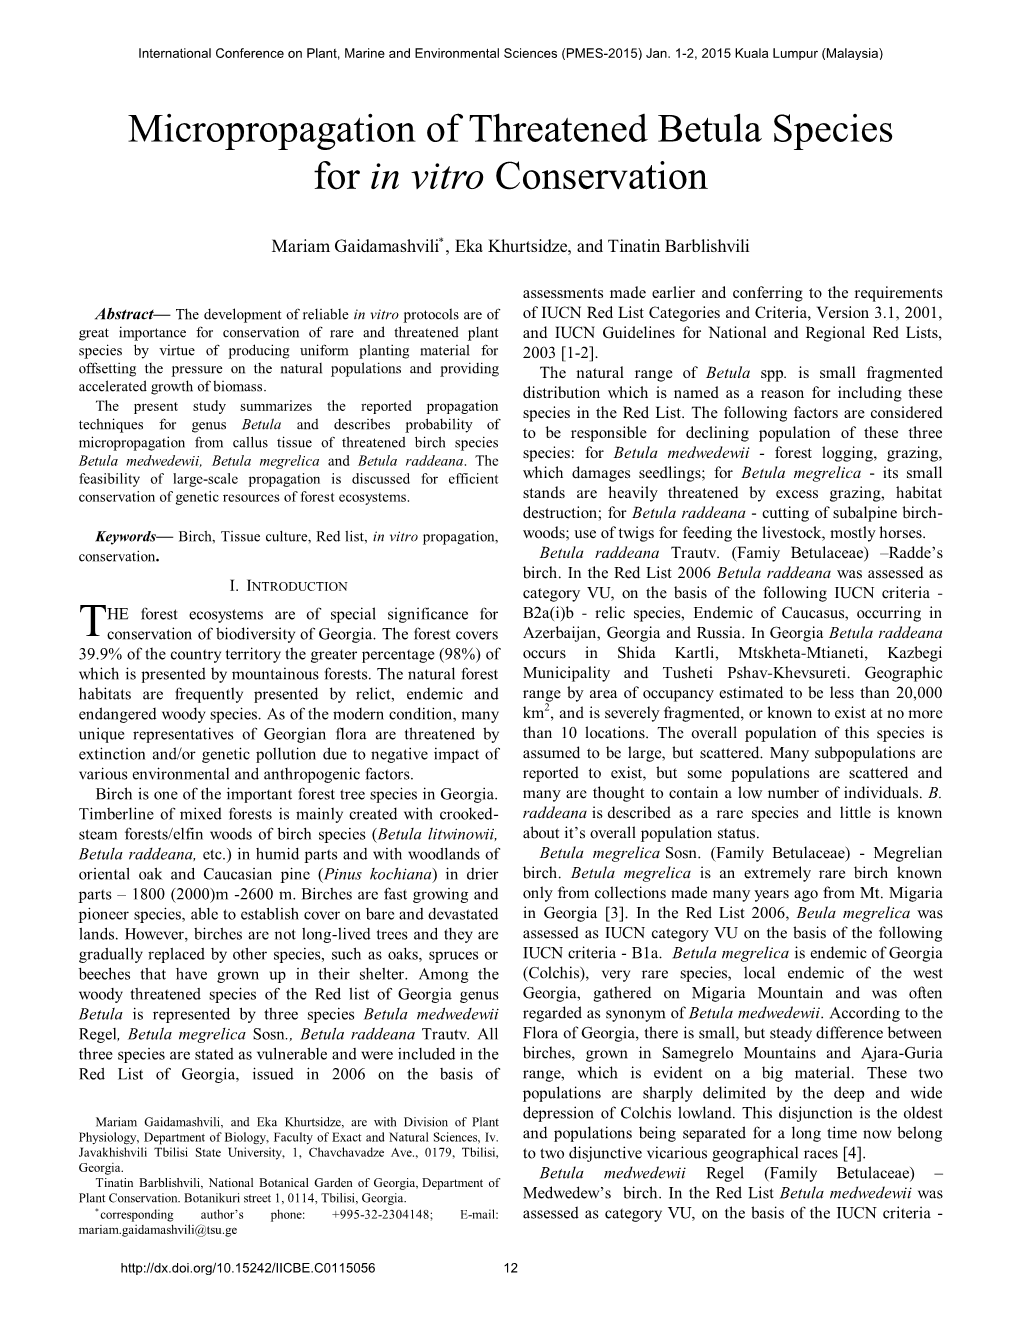 Micropropagation of Threatened Betula Species for in Vitro Conservation